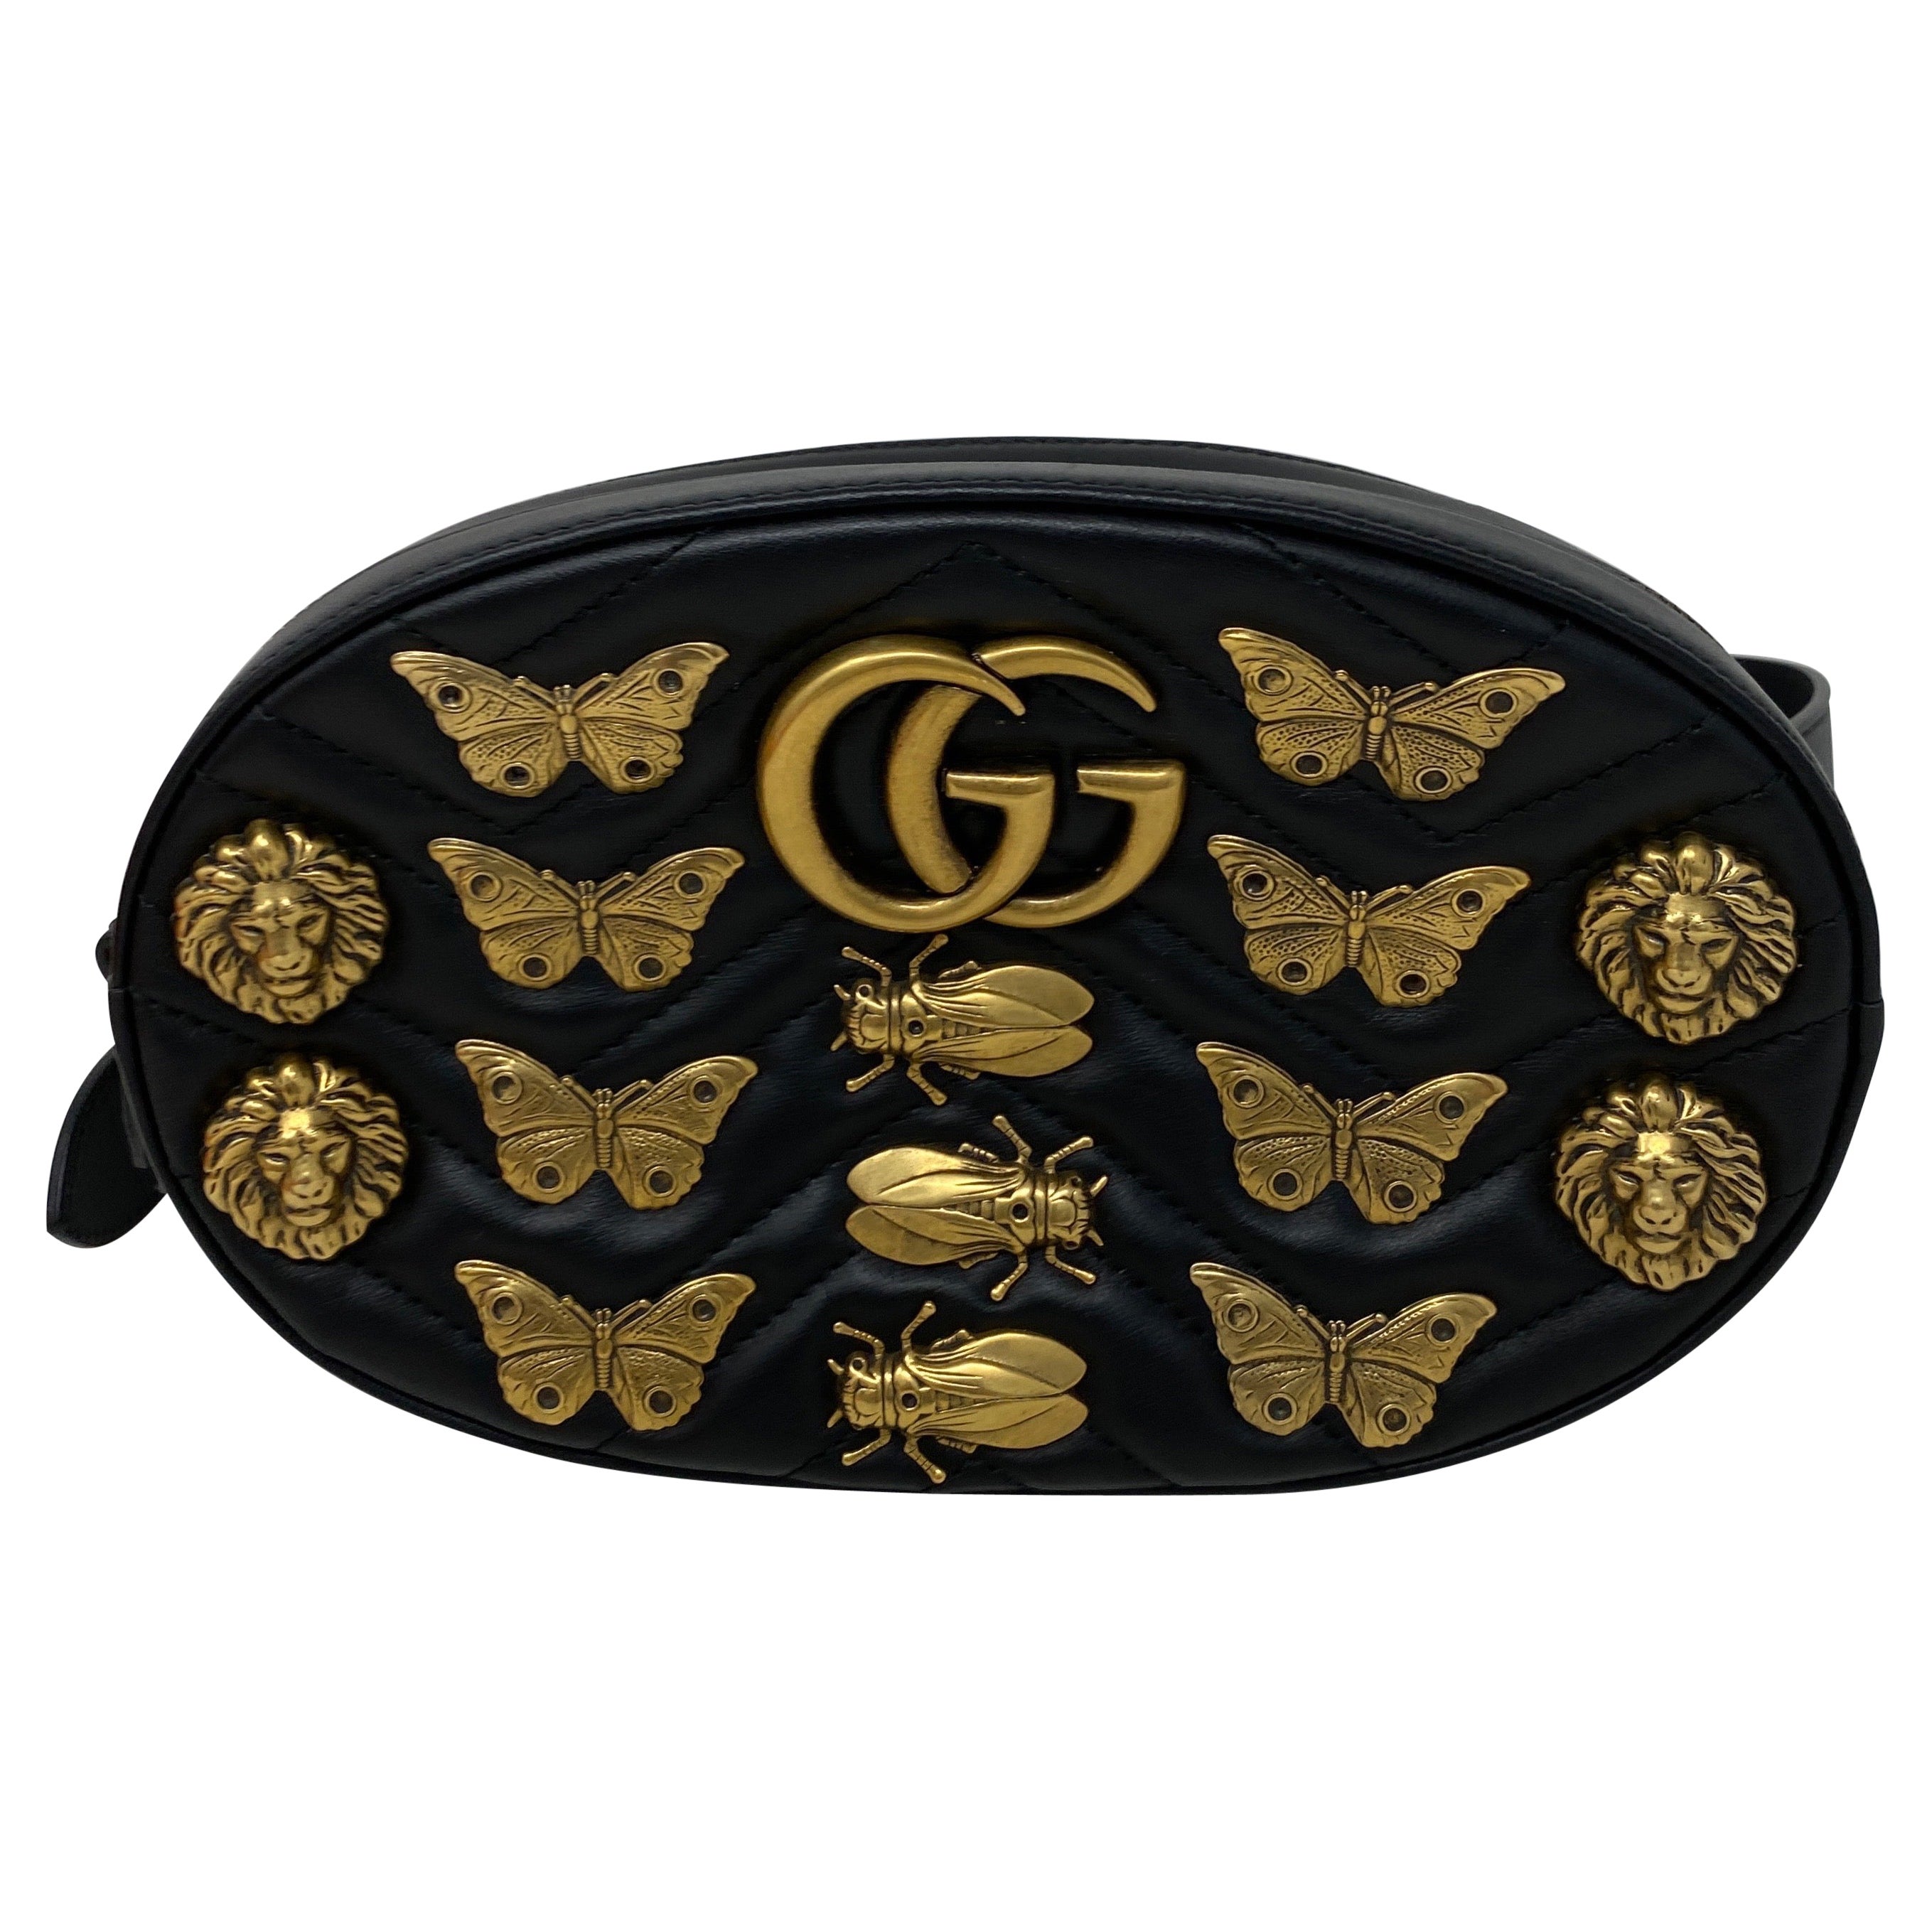 Gucci Insects Bum Bag 